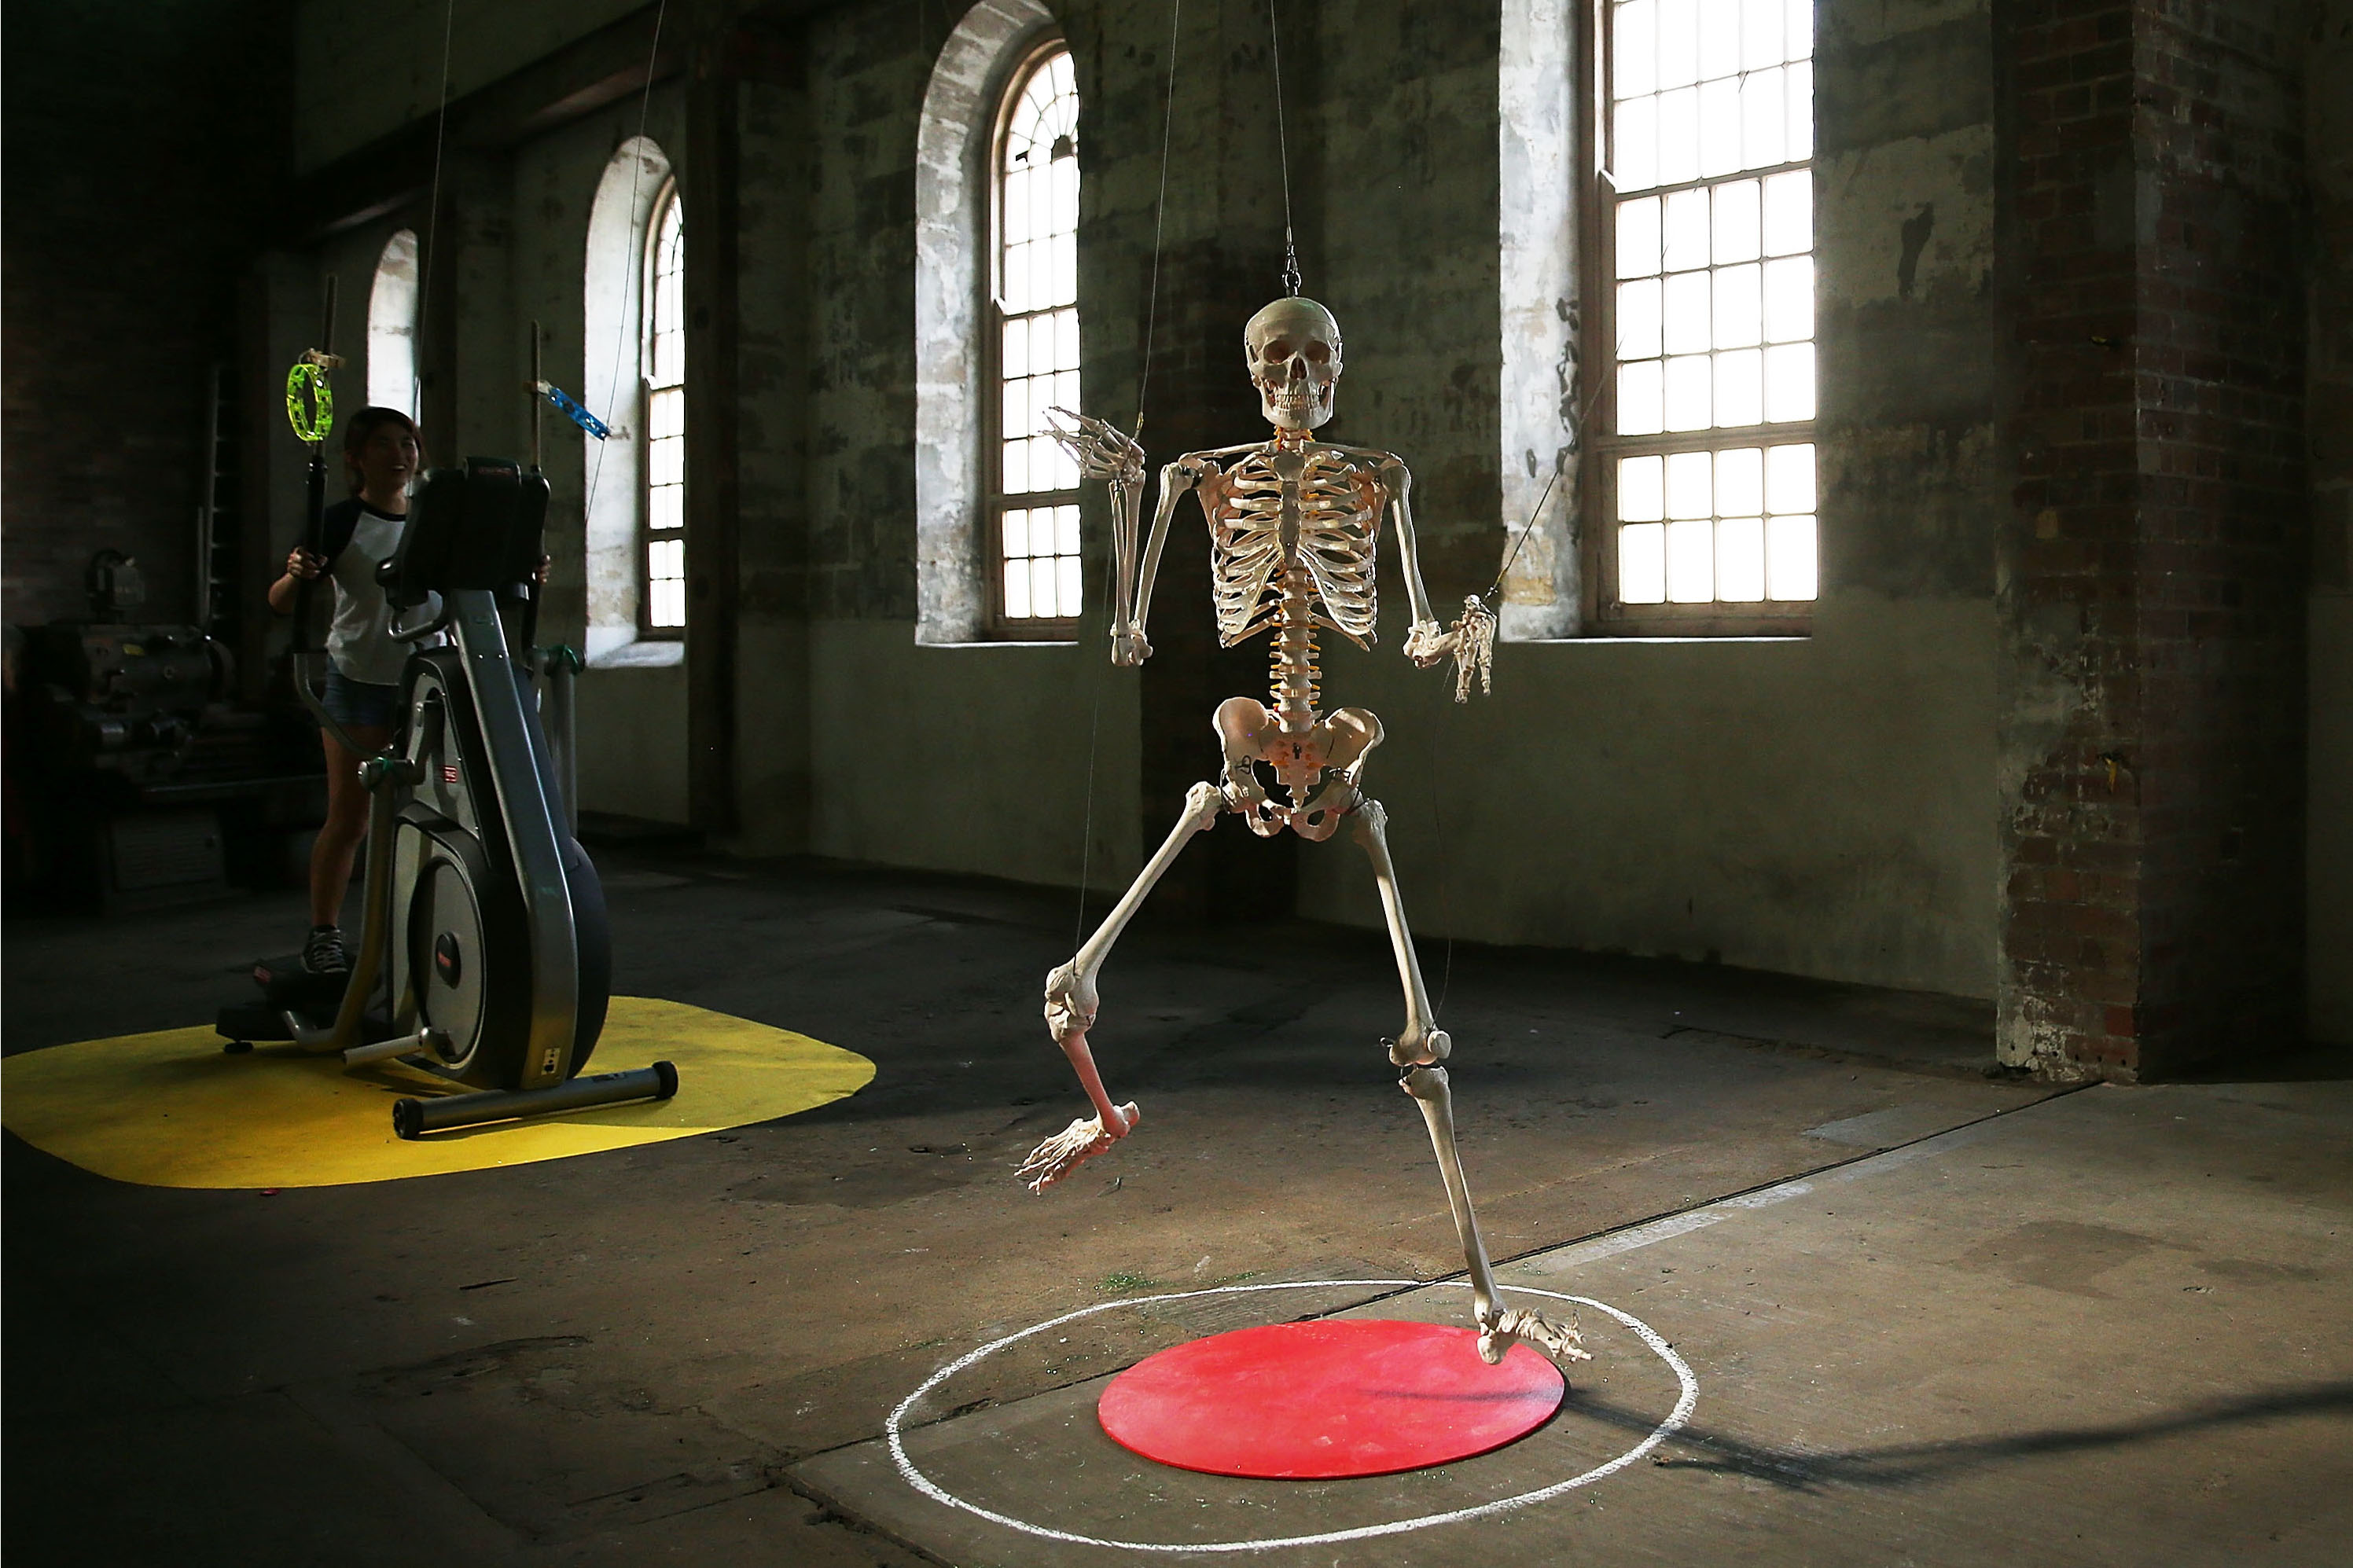 Artist XX's sculpture 'XX' is displayed during a media preview as part of the 19th Biennale of Sydney at Cockatoo Island on March 18, 2014 in Sydney.